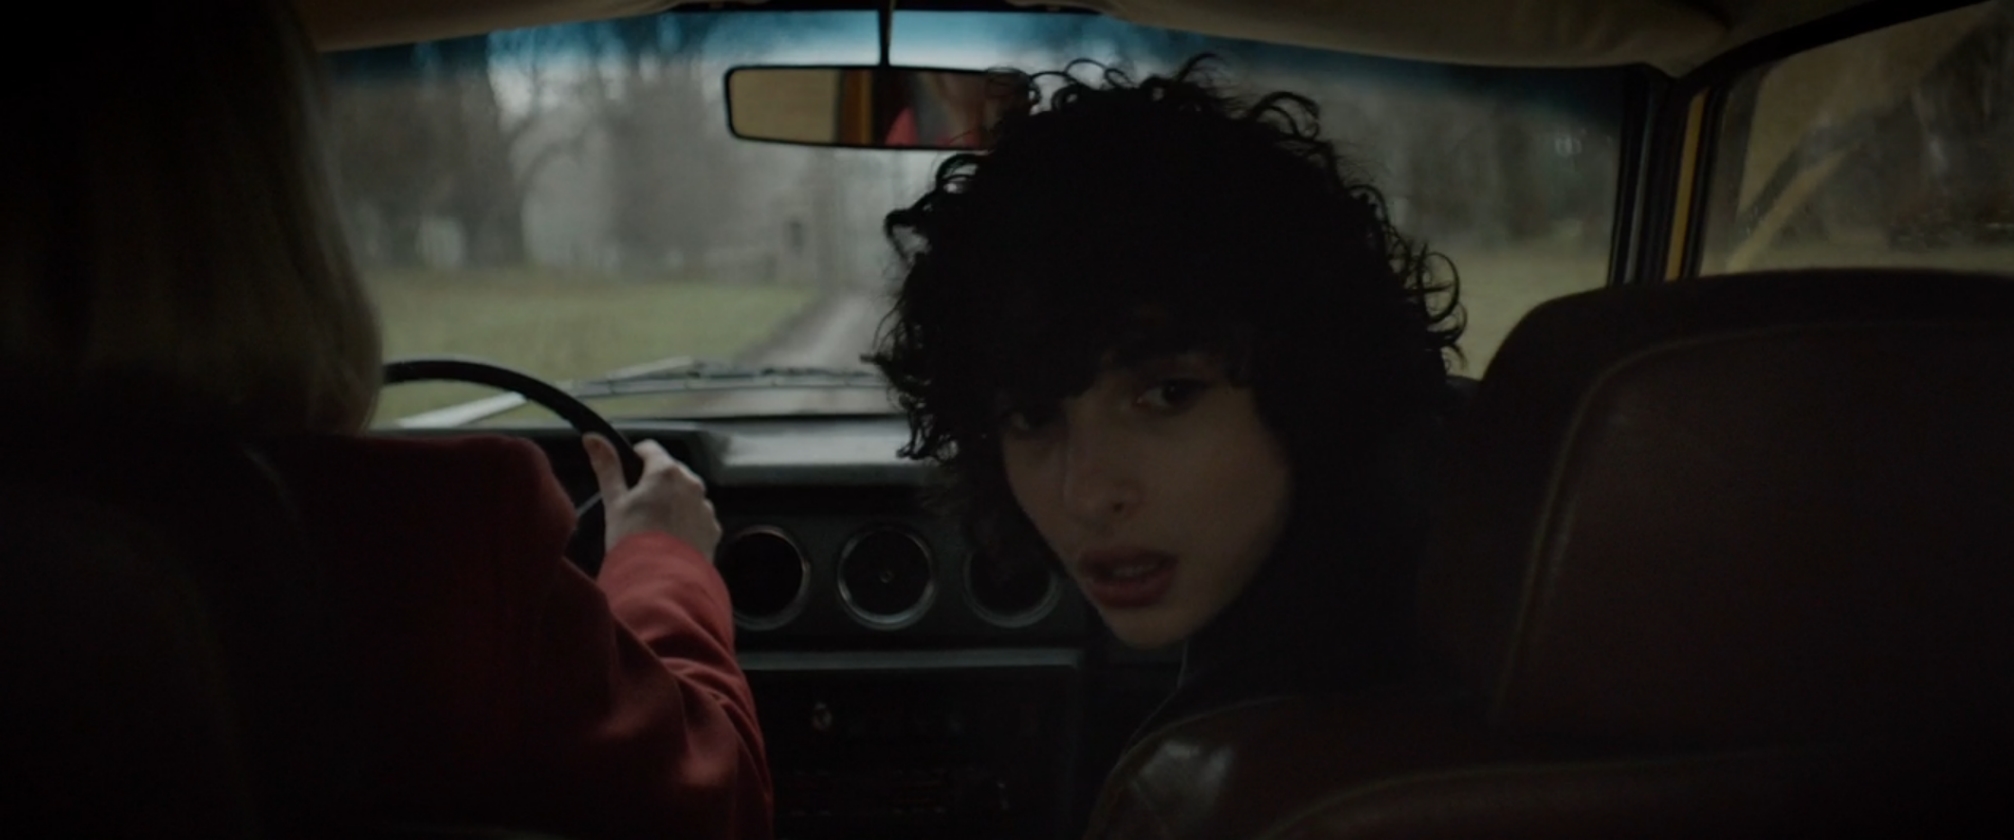 Picture of Finn Wolfhard in The Turning - finn-wolfhard-1586377821.jpg ...